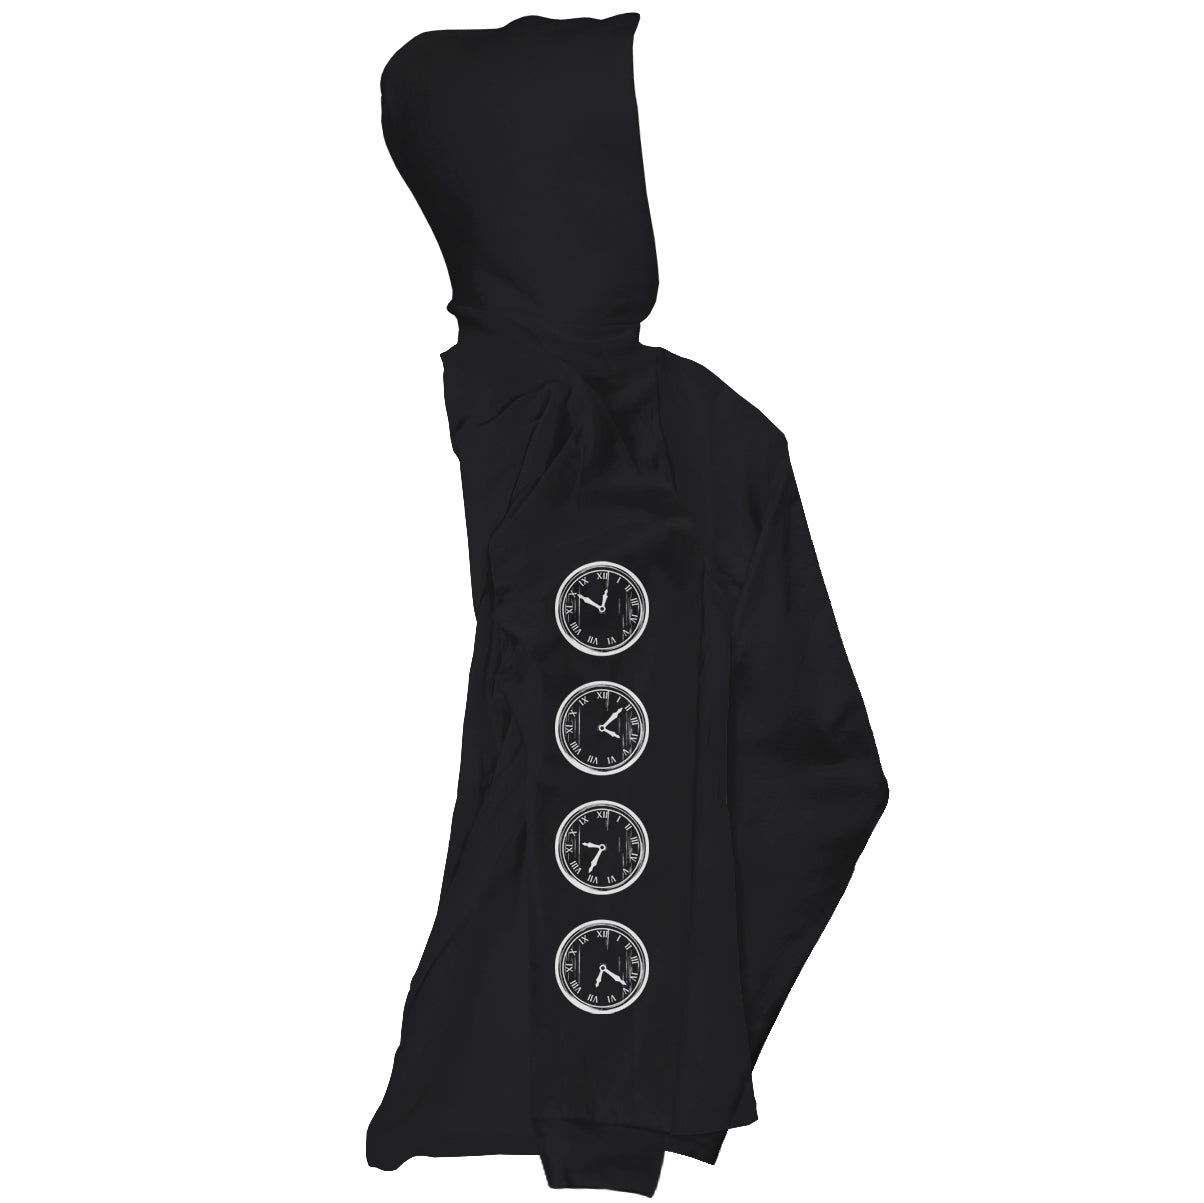 FORGIVE "Trapped" Black Hoodie